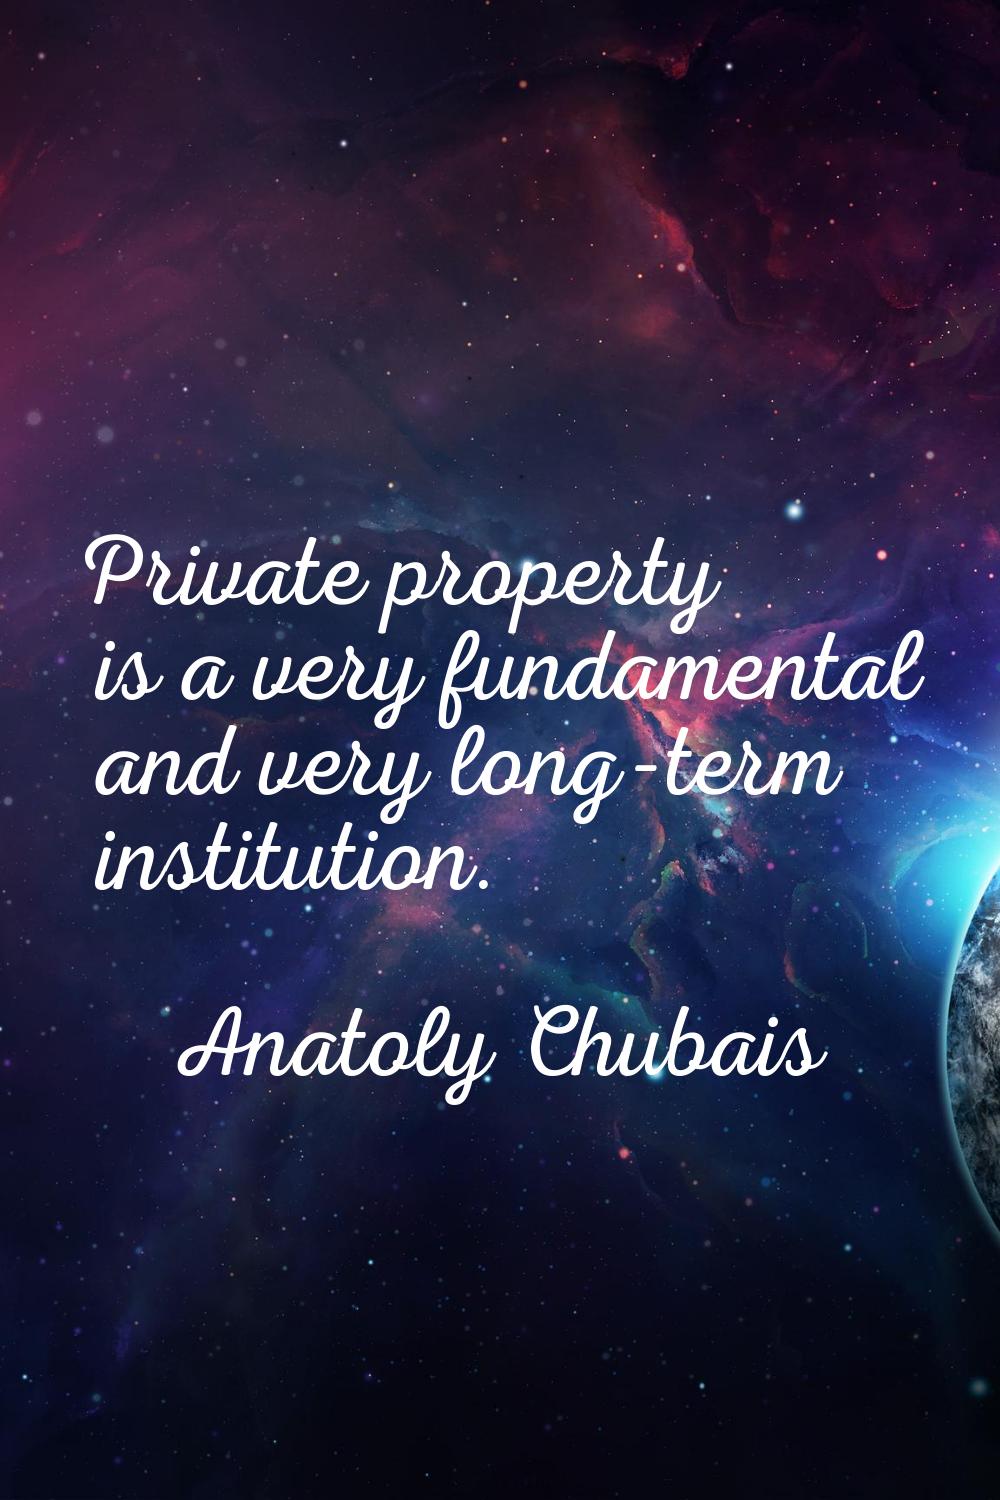 Private property is a very fundamental and very long-term institution.